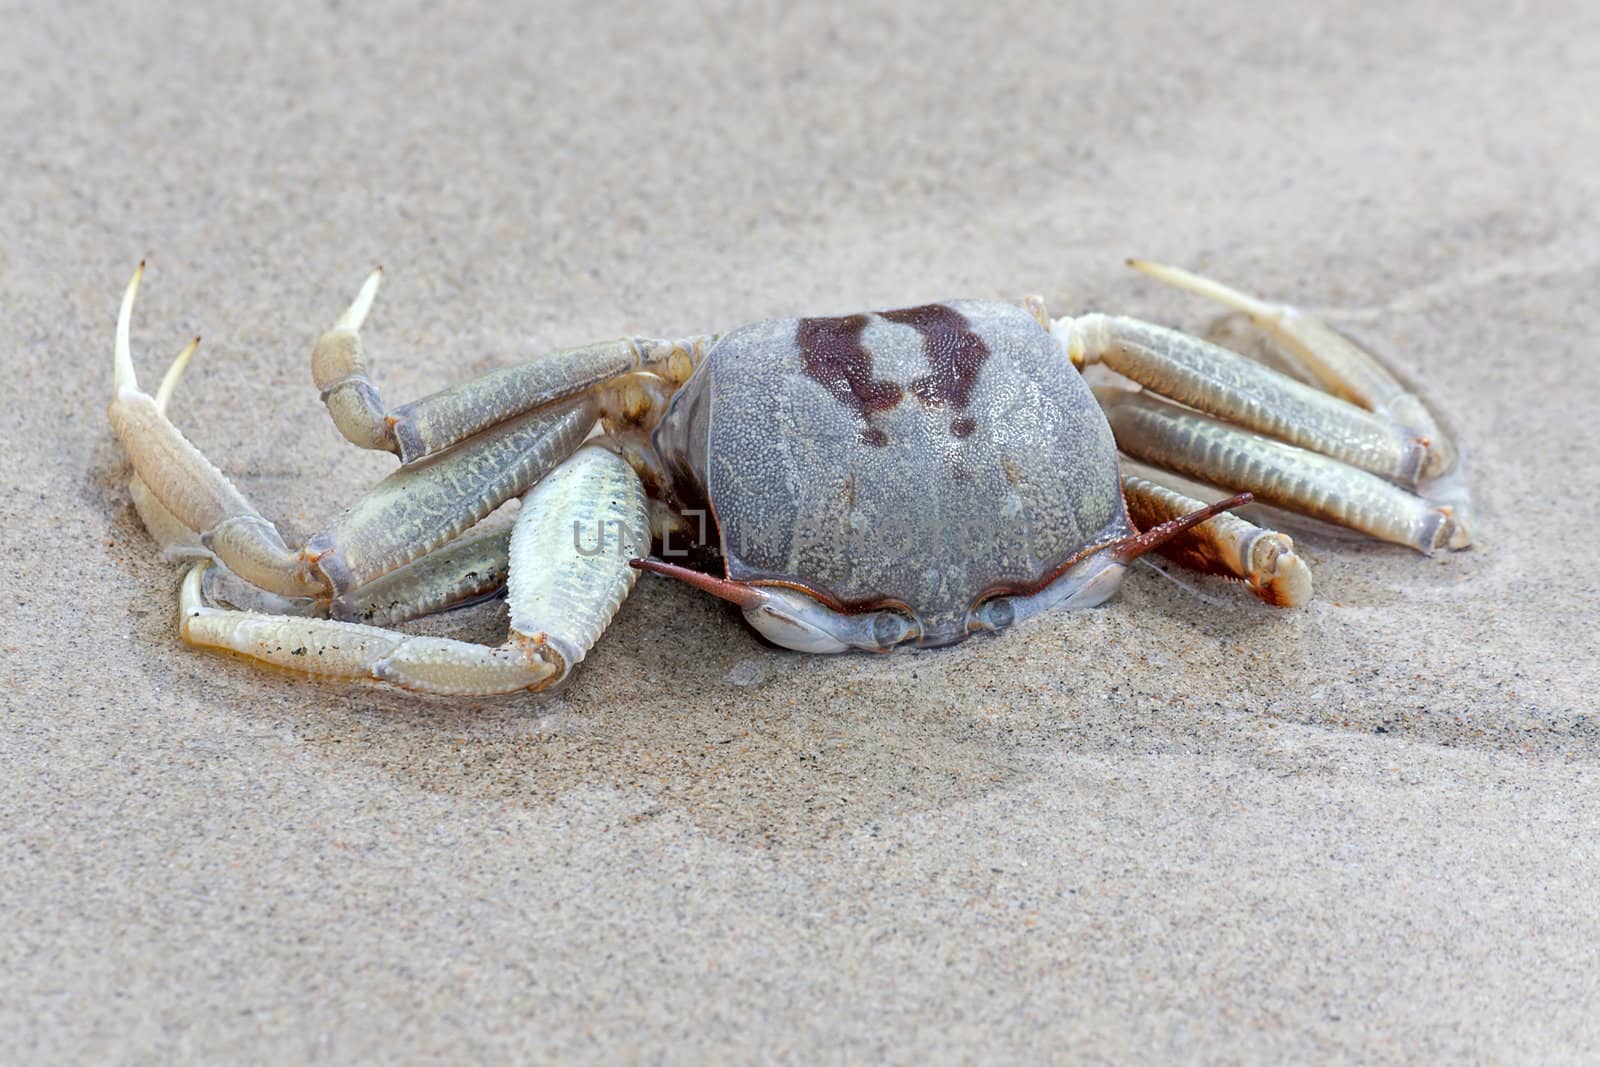 Crab in  awesome position in  sand, Thailand.